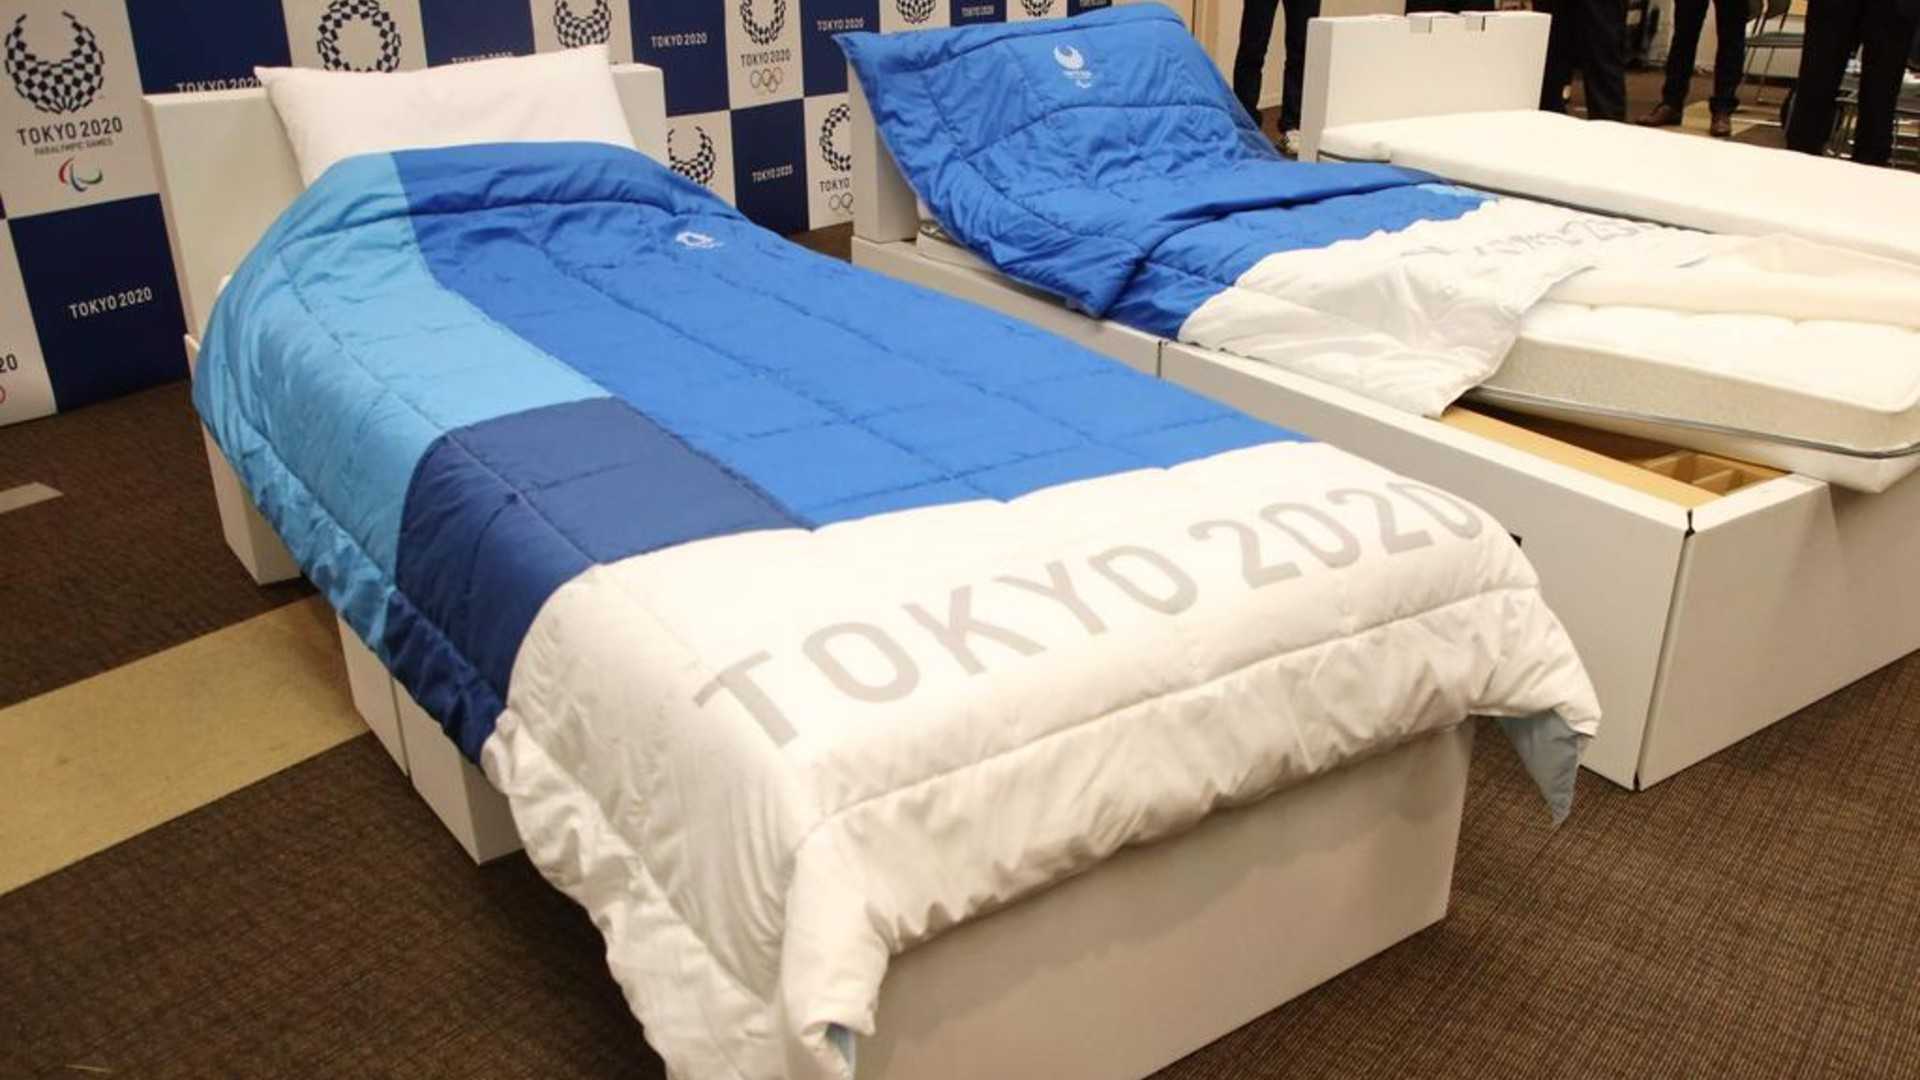 Tokyo Olympics Cardboard Village Beds Anti Sex Heres The Real Story 